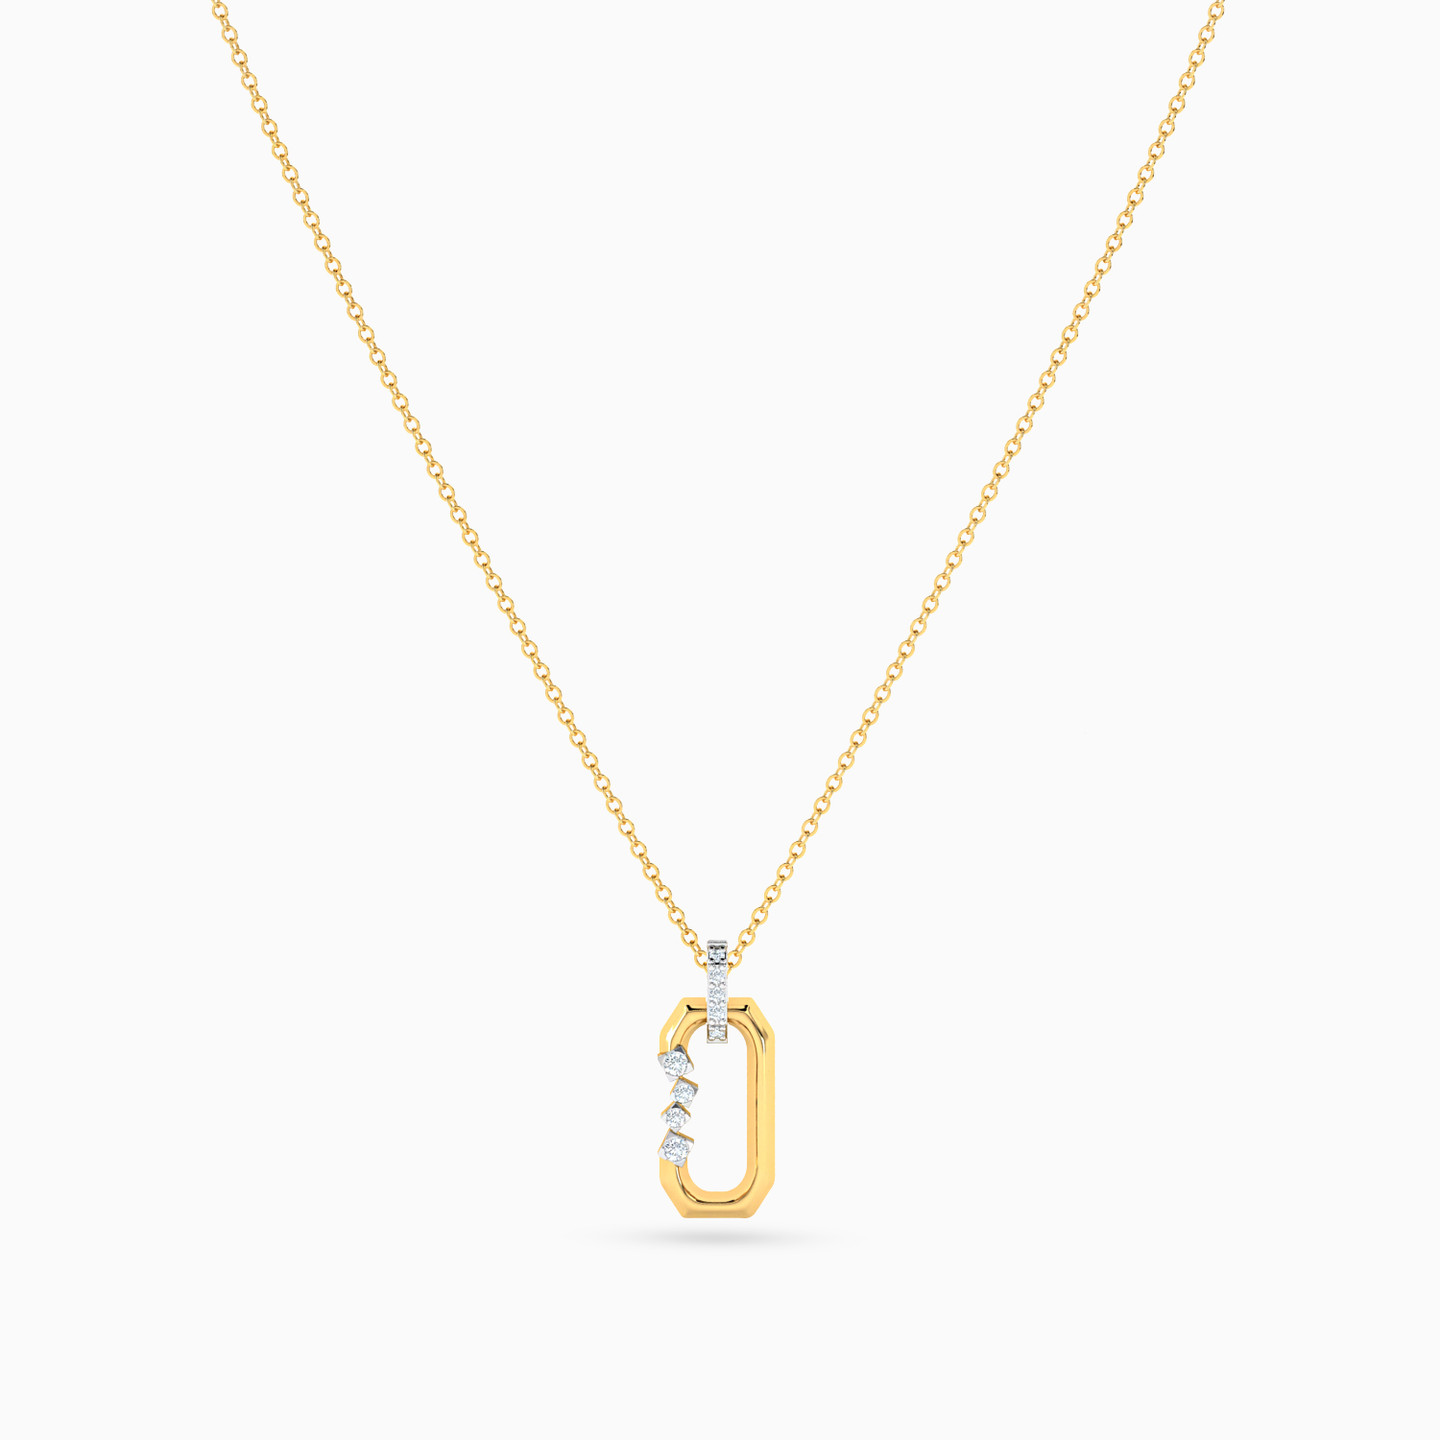 Rectangle Shaped Diamond Pendant with 18K Gold Chain - 3